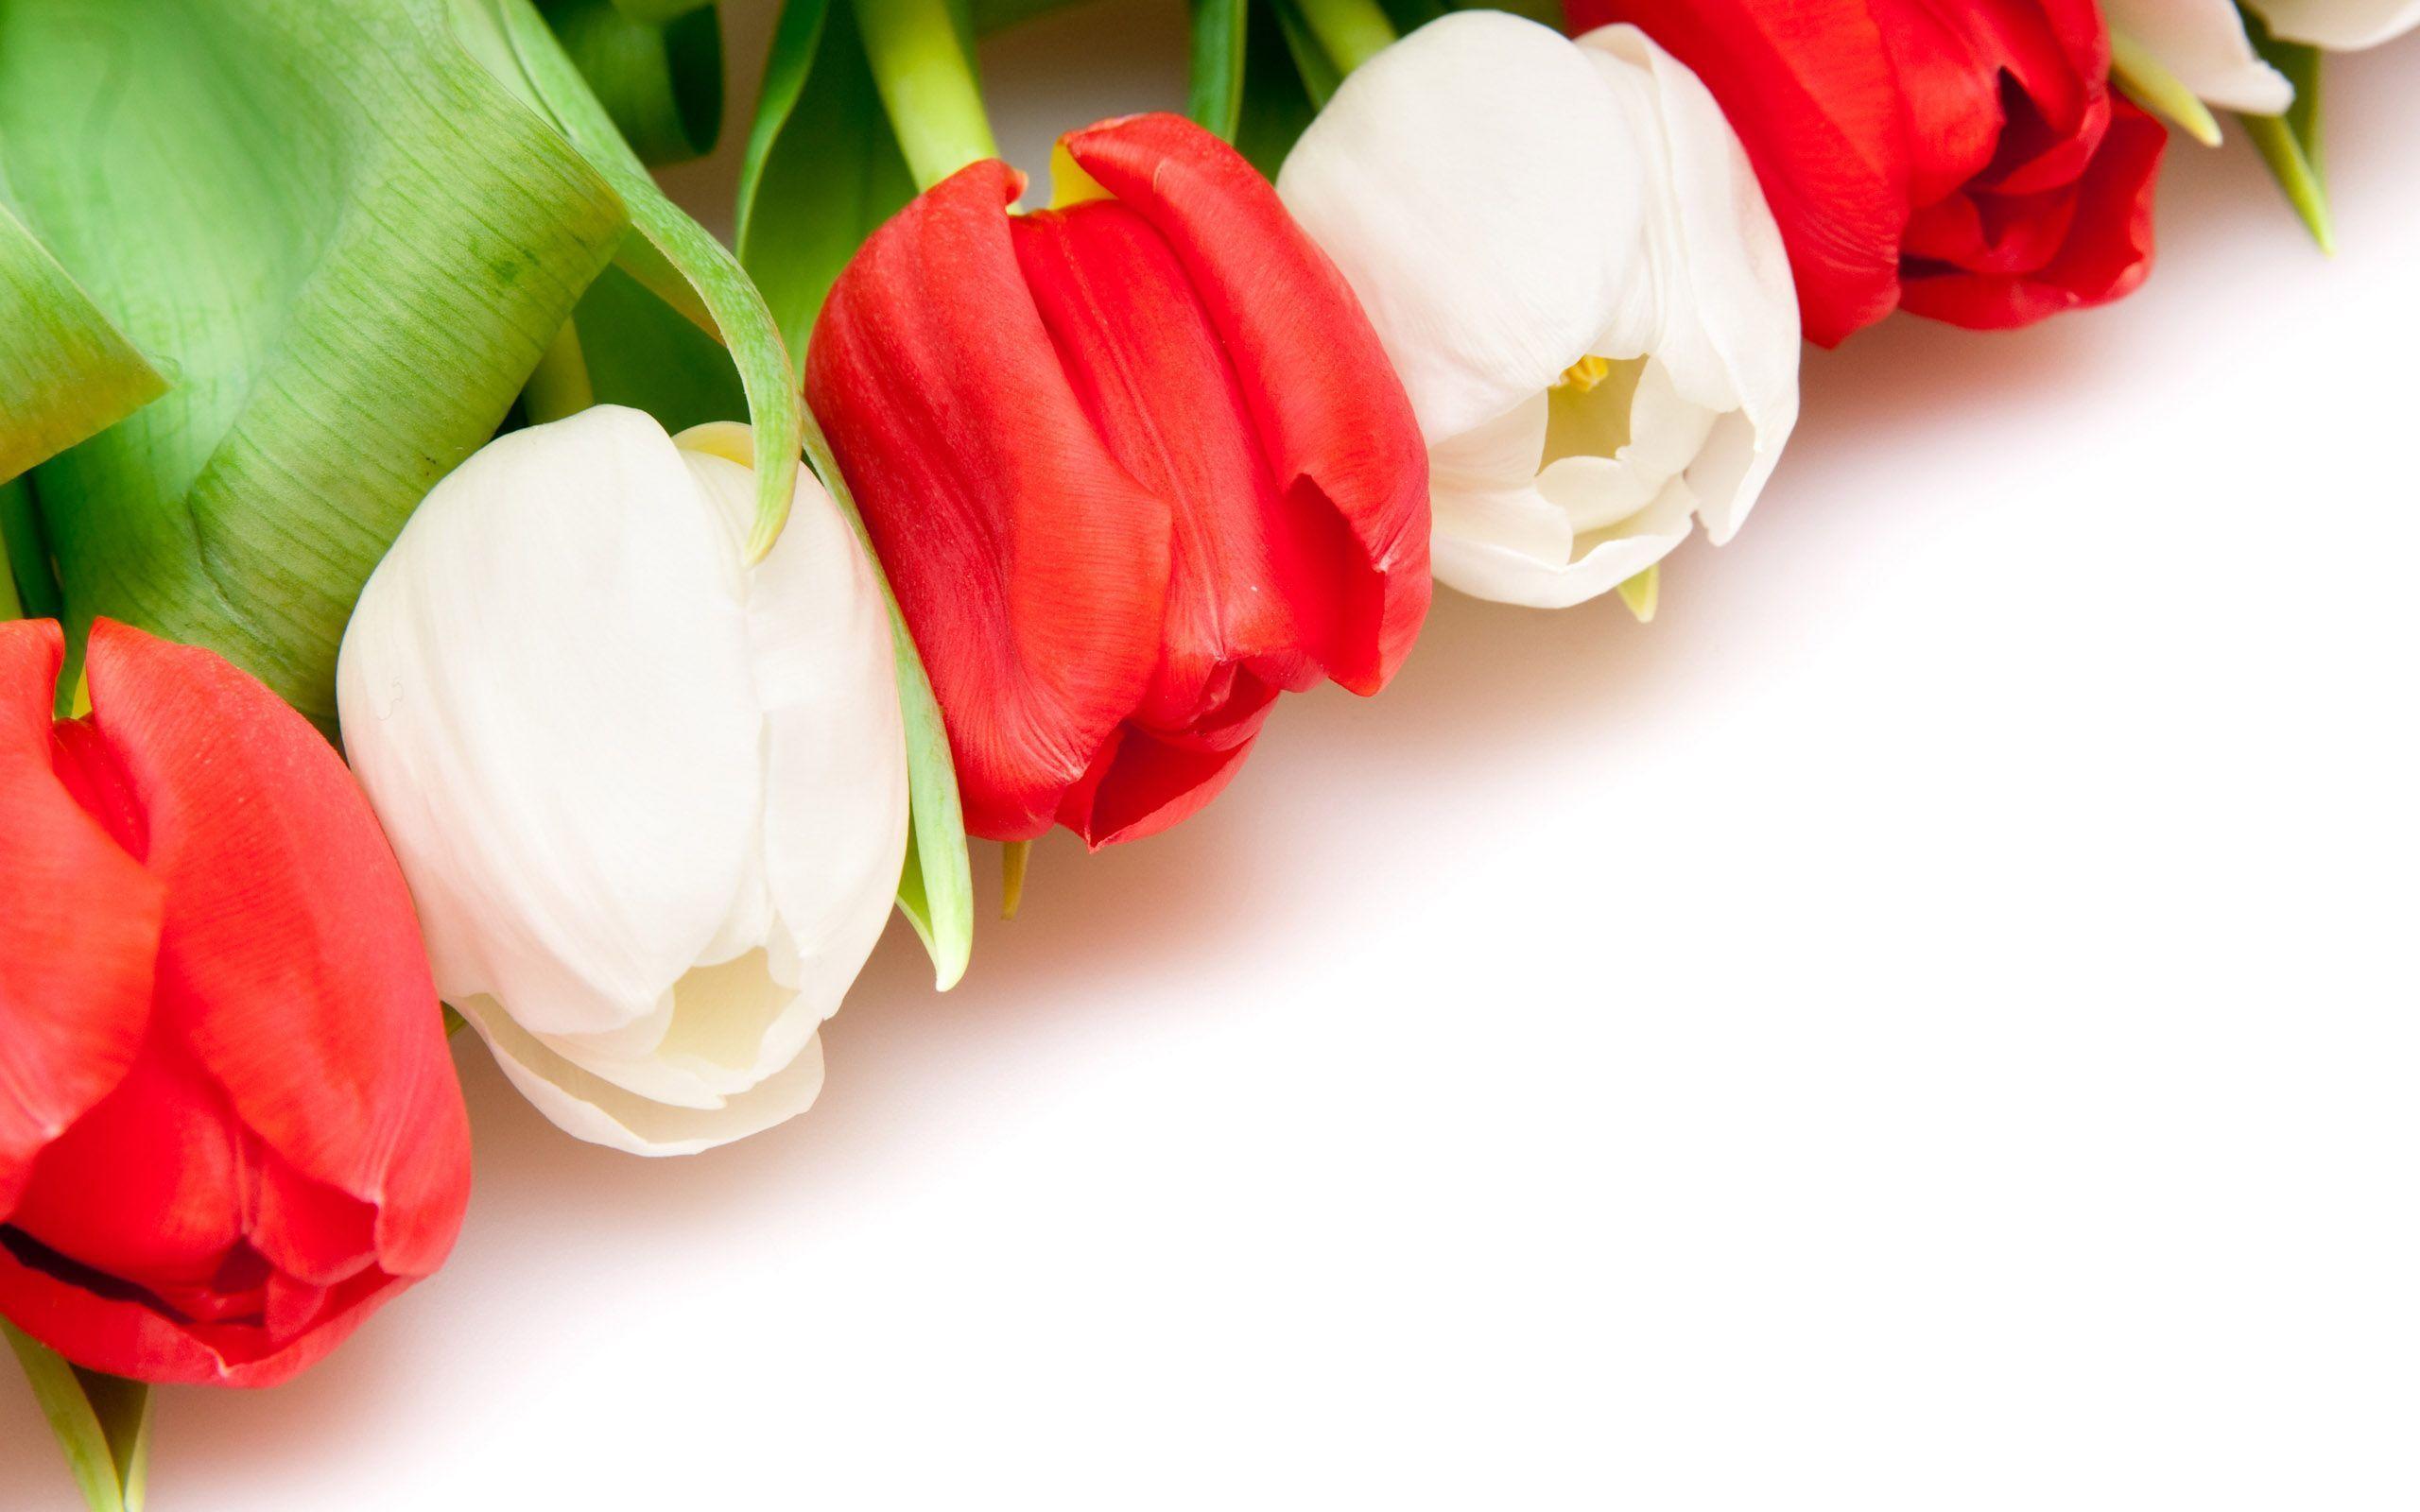 Red Tulips Wallpaper